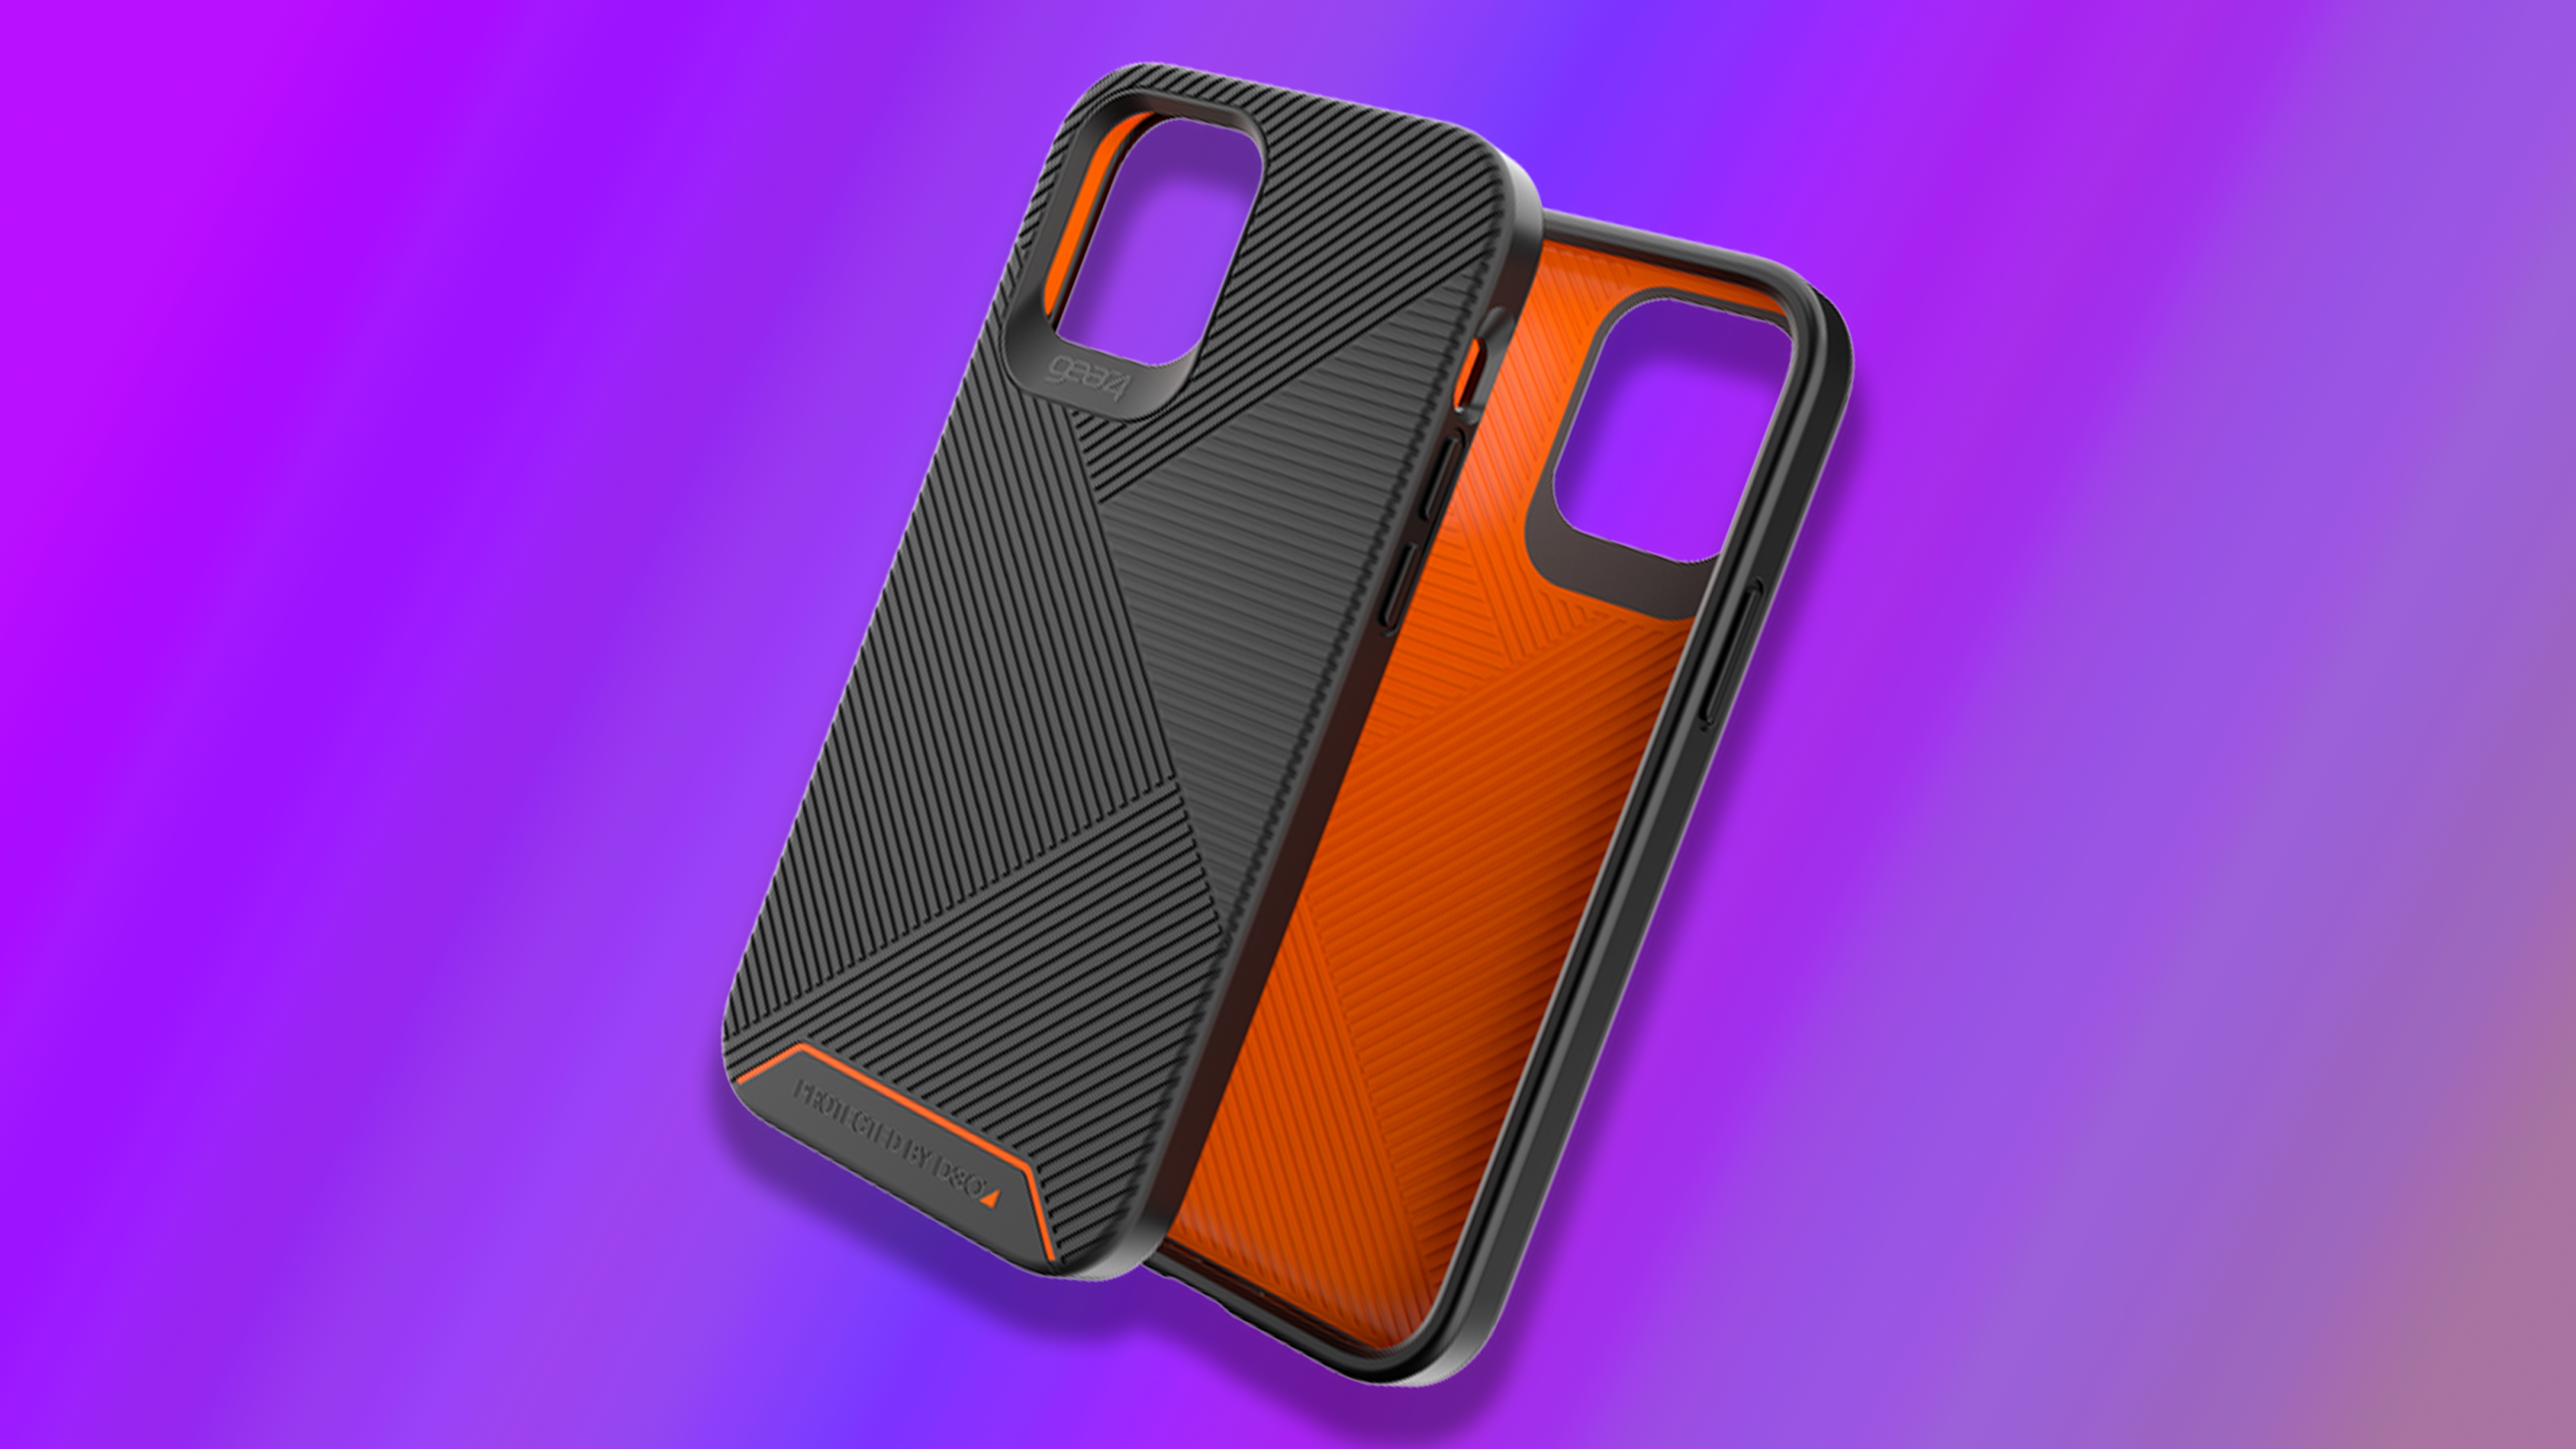 The best cases for iPhone 13, iPhone 13 Pro, iPhone 13 Mini and iPhone 13 Pro Max